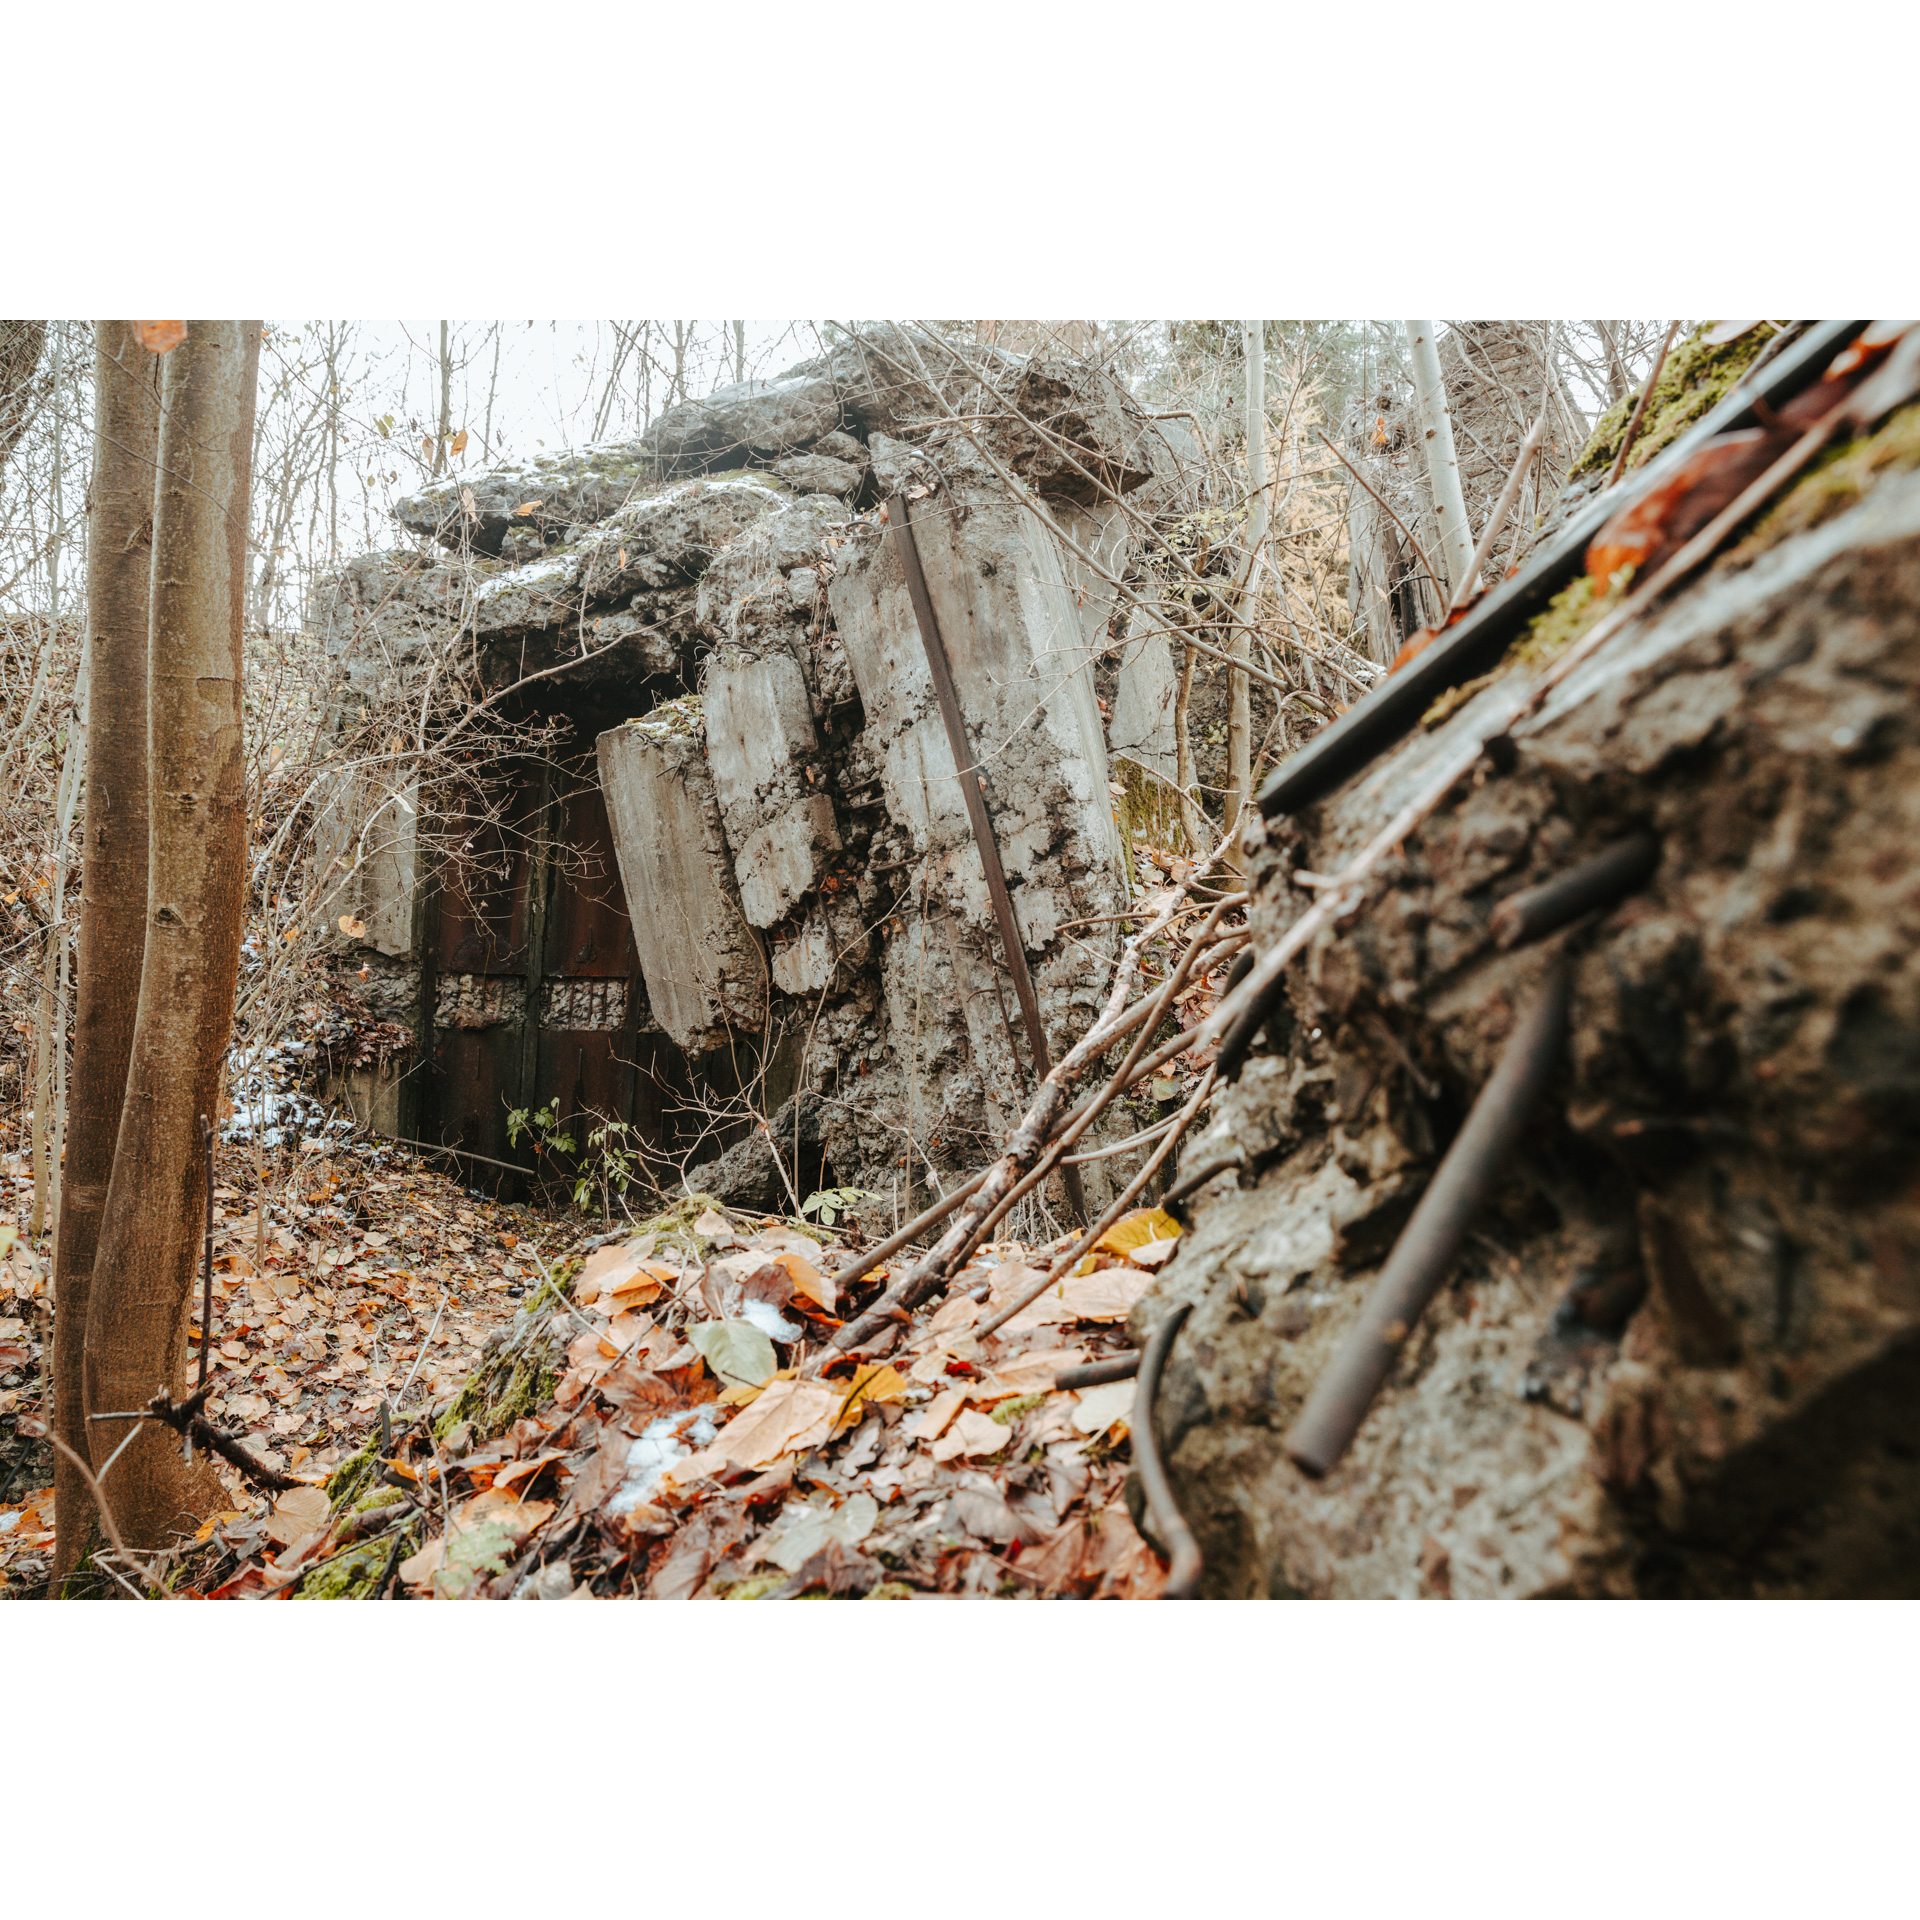 A fragment of a concrete, destroyed bunker in the forest with protruding iron reinforcements